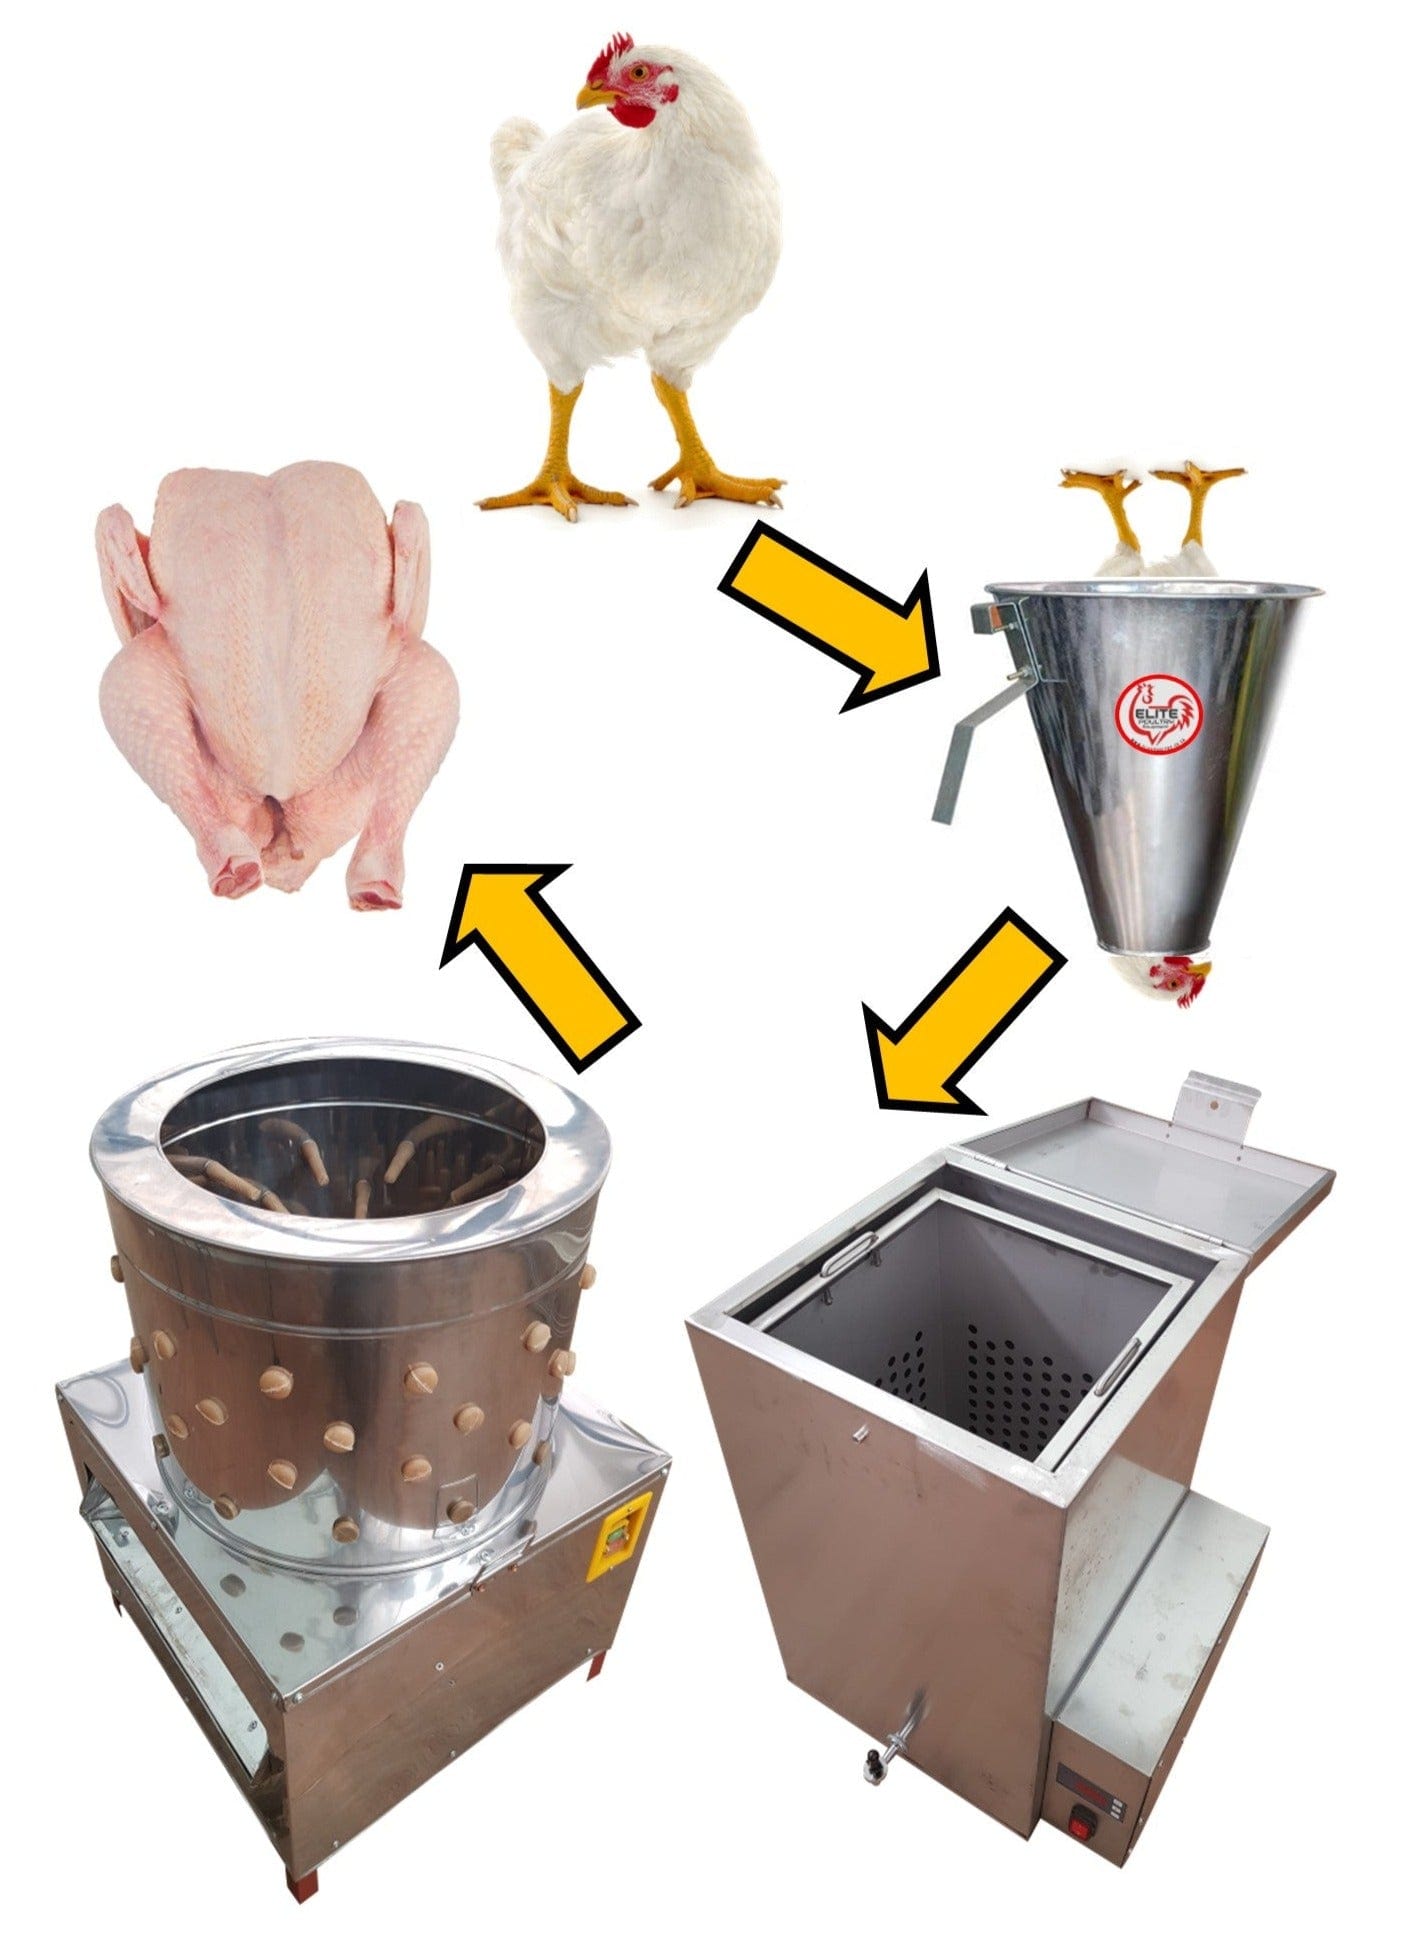 Complete poultry processing package